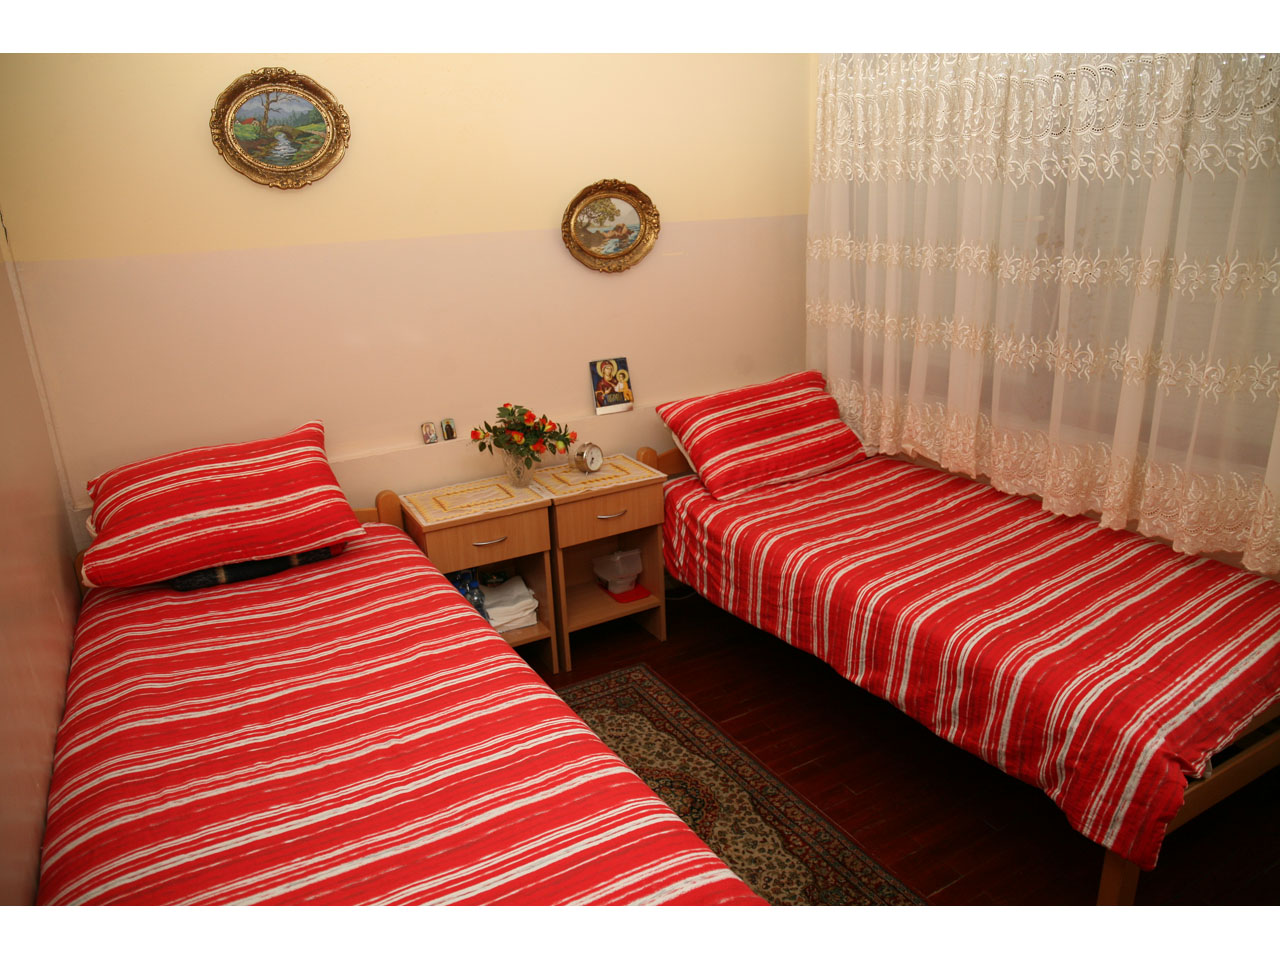 HOME FOR OLD PERSONS KRUNA Homes and care for the elderly Beograd